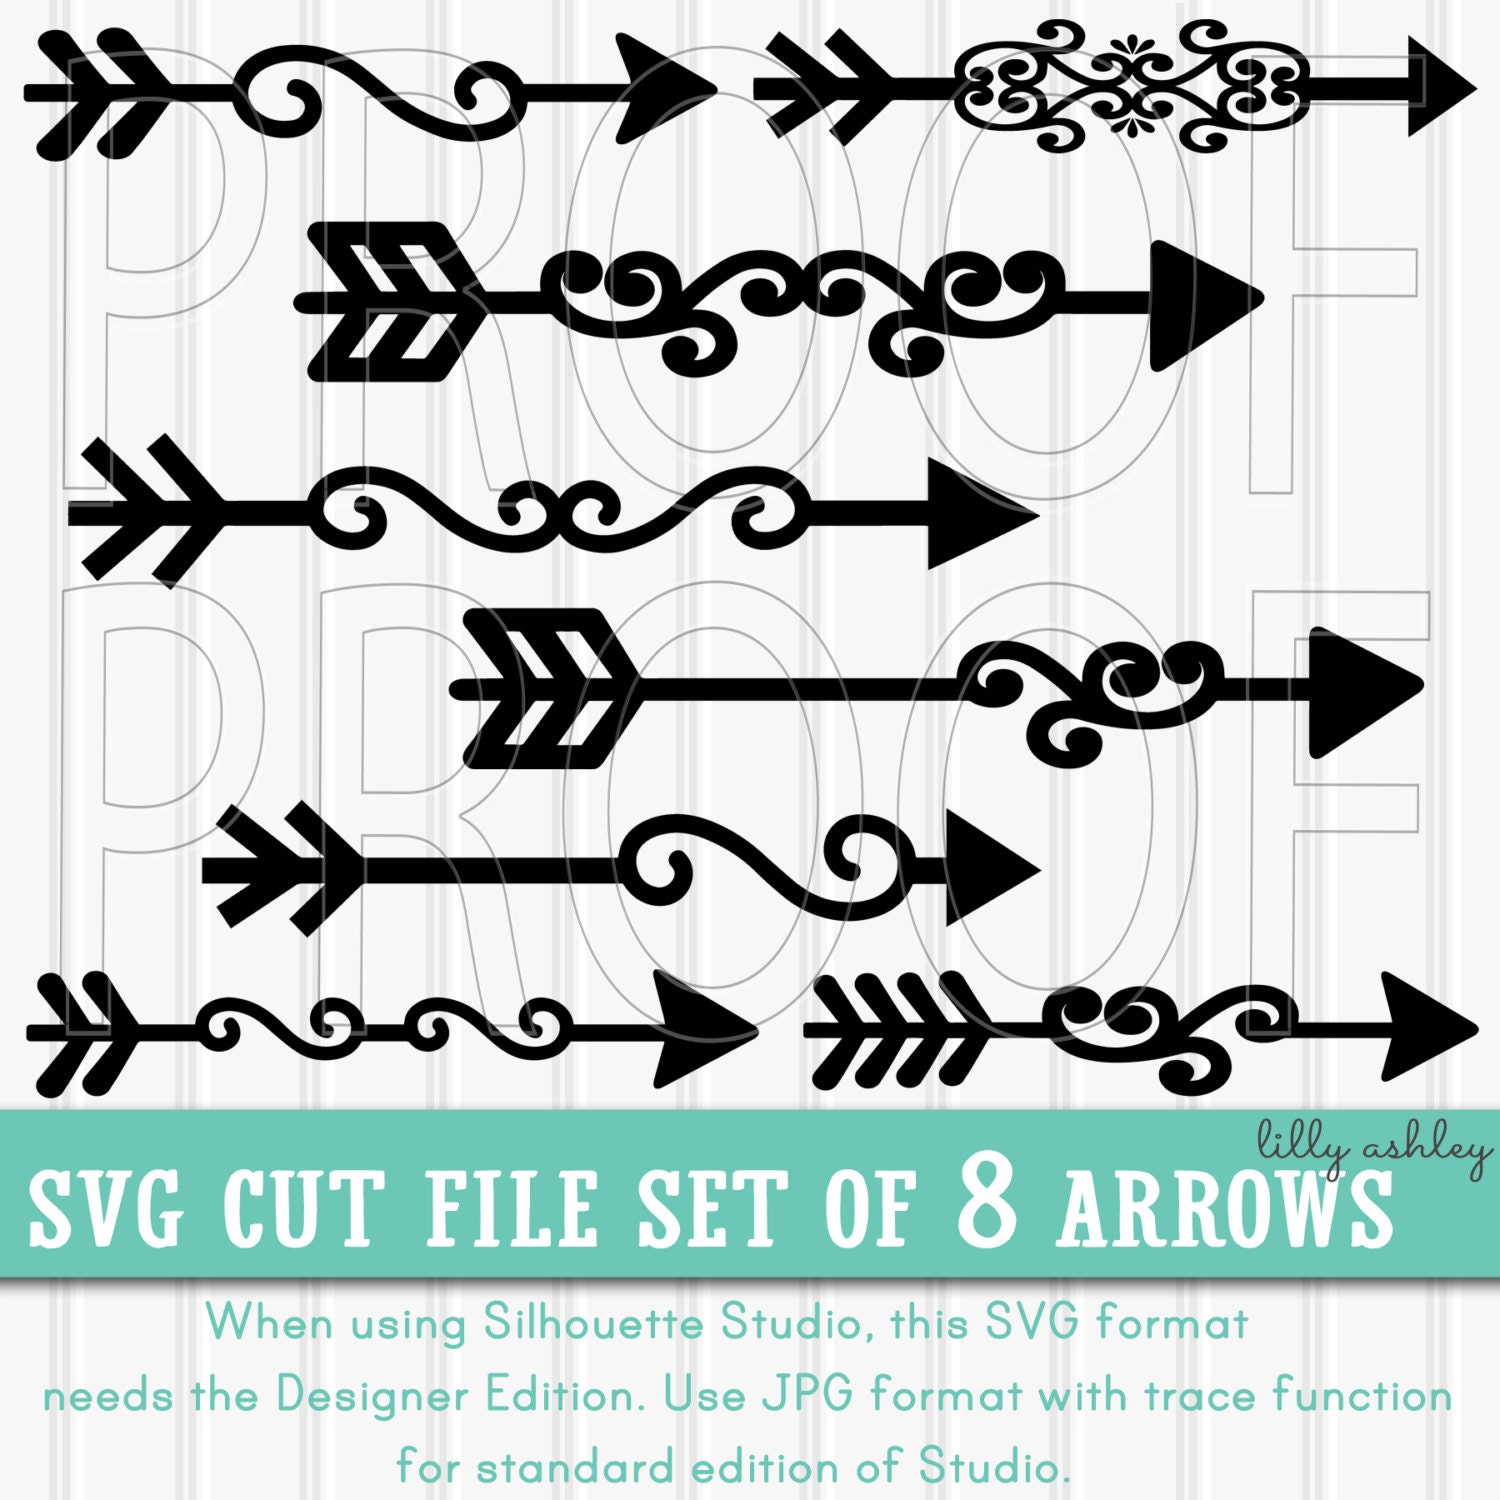 Download Arrow SVG Cut File Set of 8-Commercial use ok Includes PNG